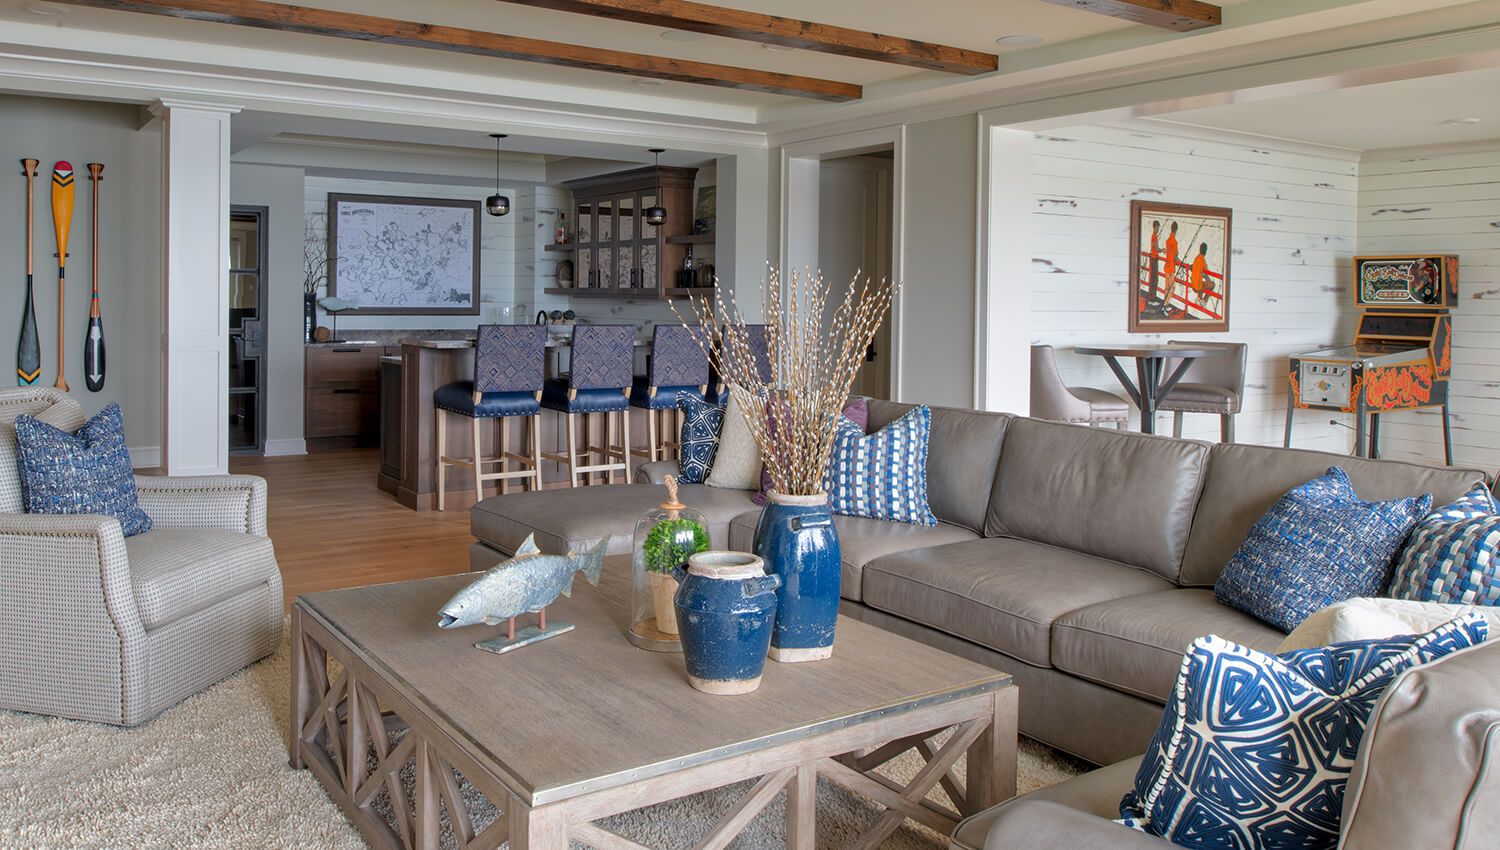 A nautical style entertainment room.